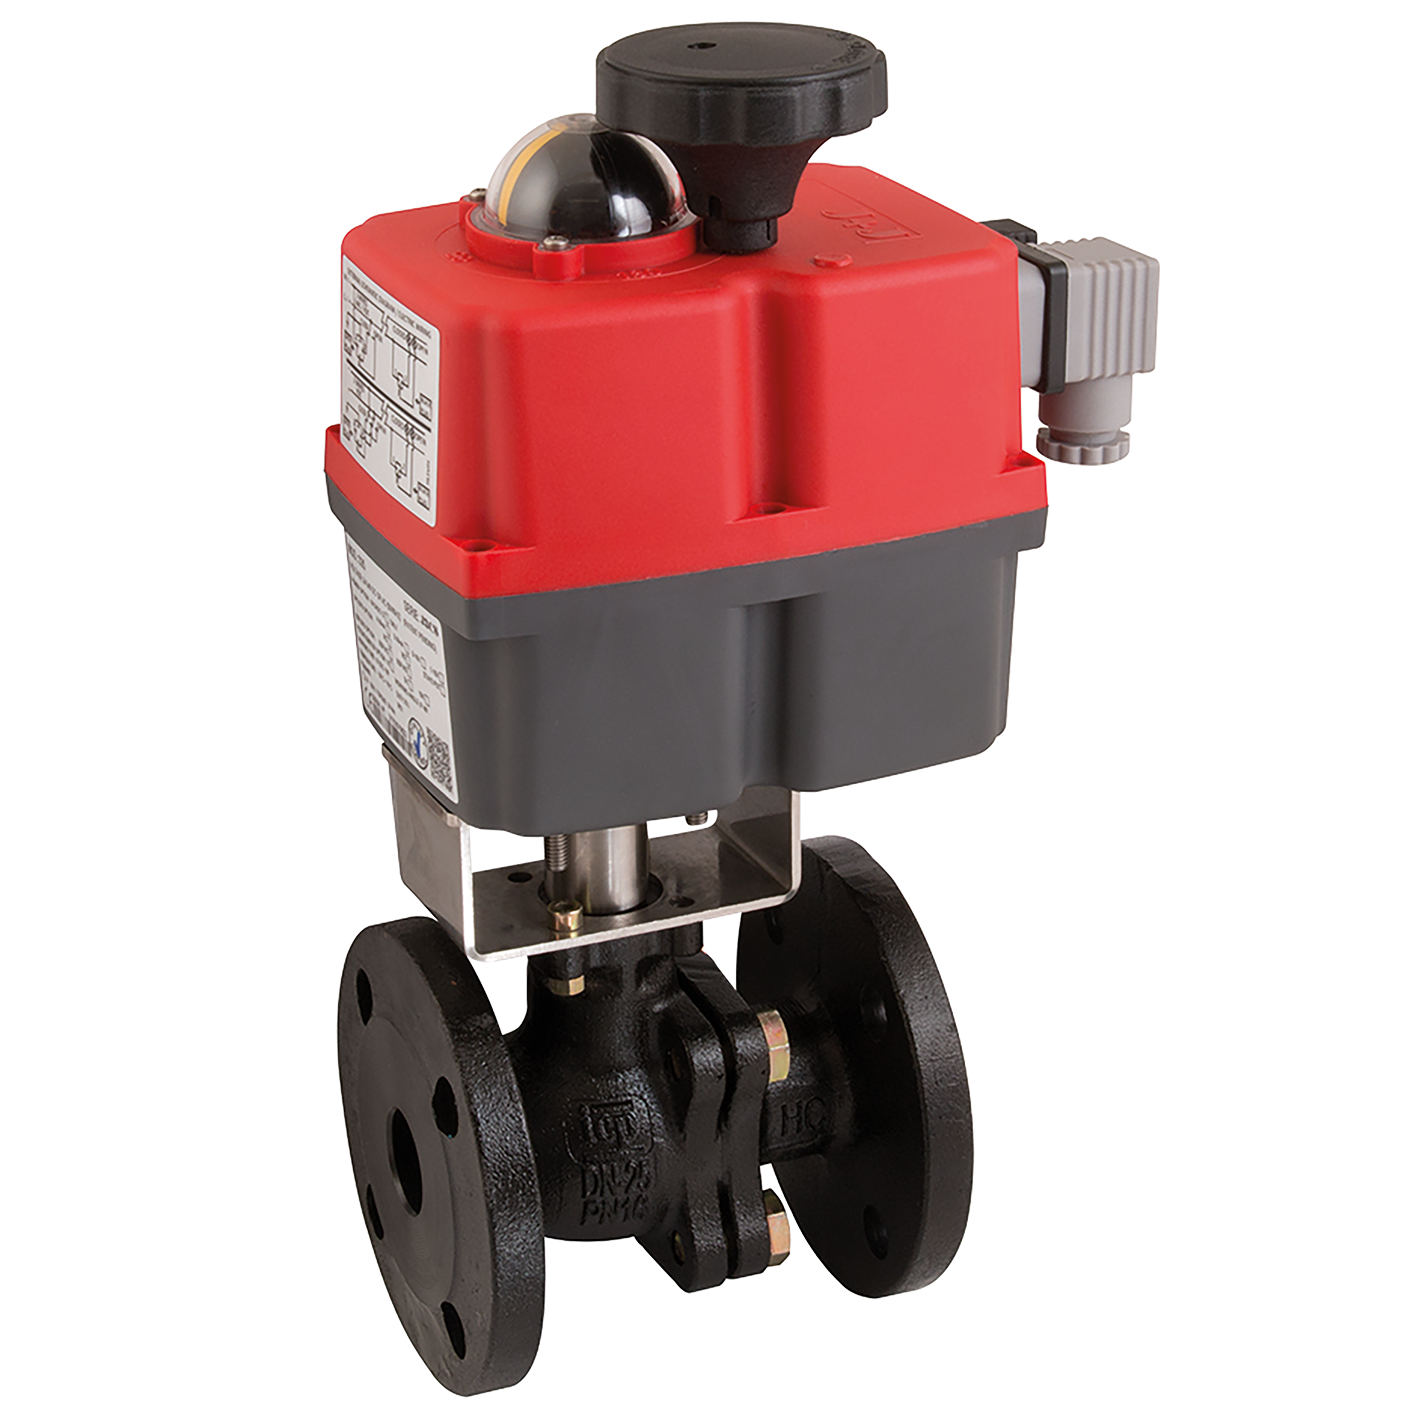 Suppliers of Electric Actuated Cast Iron Ball Valve UK